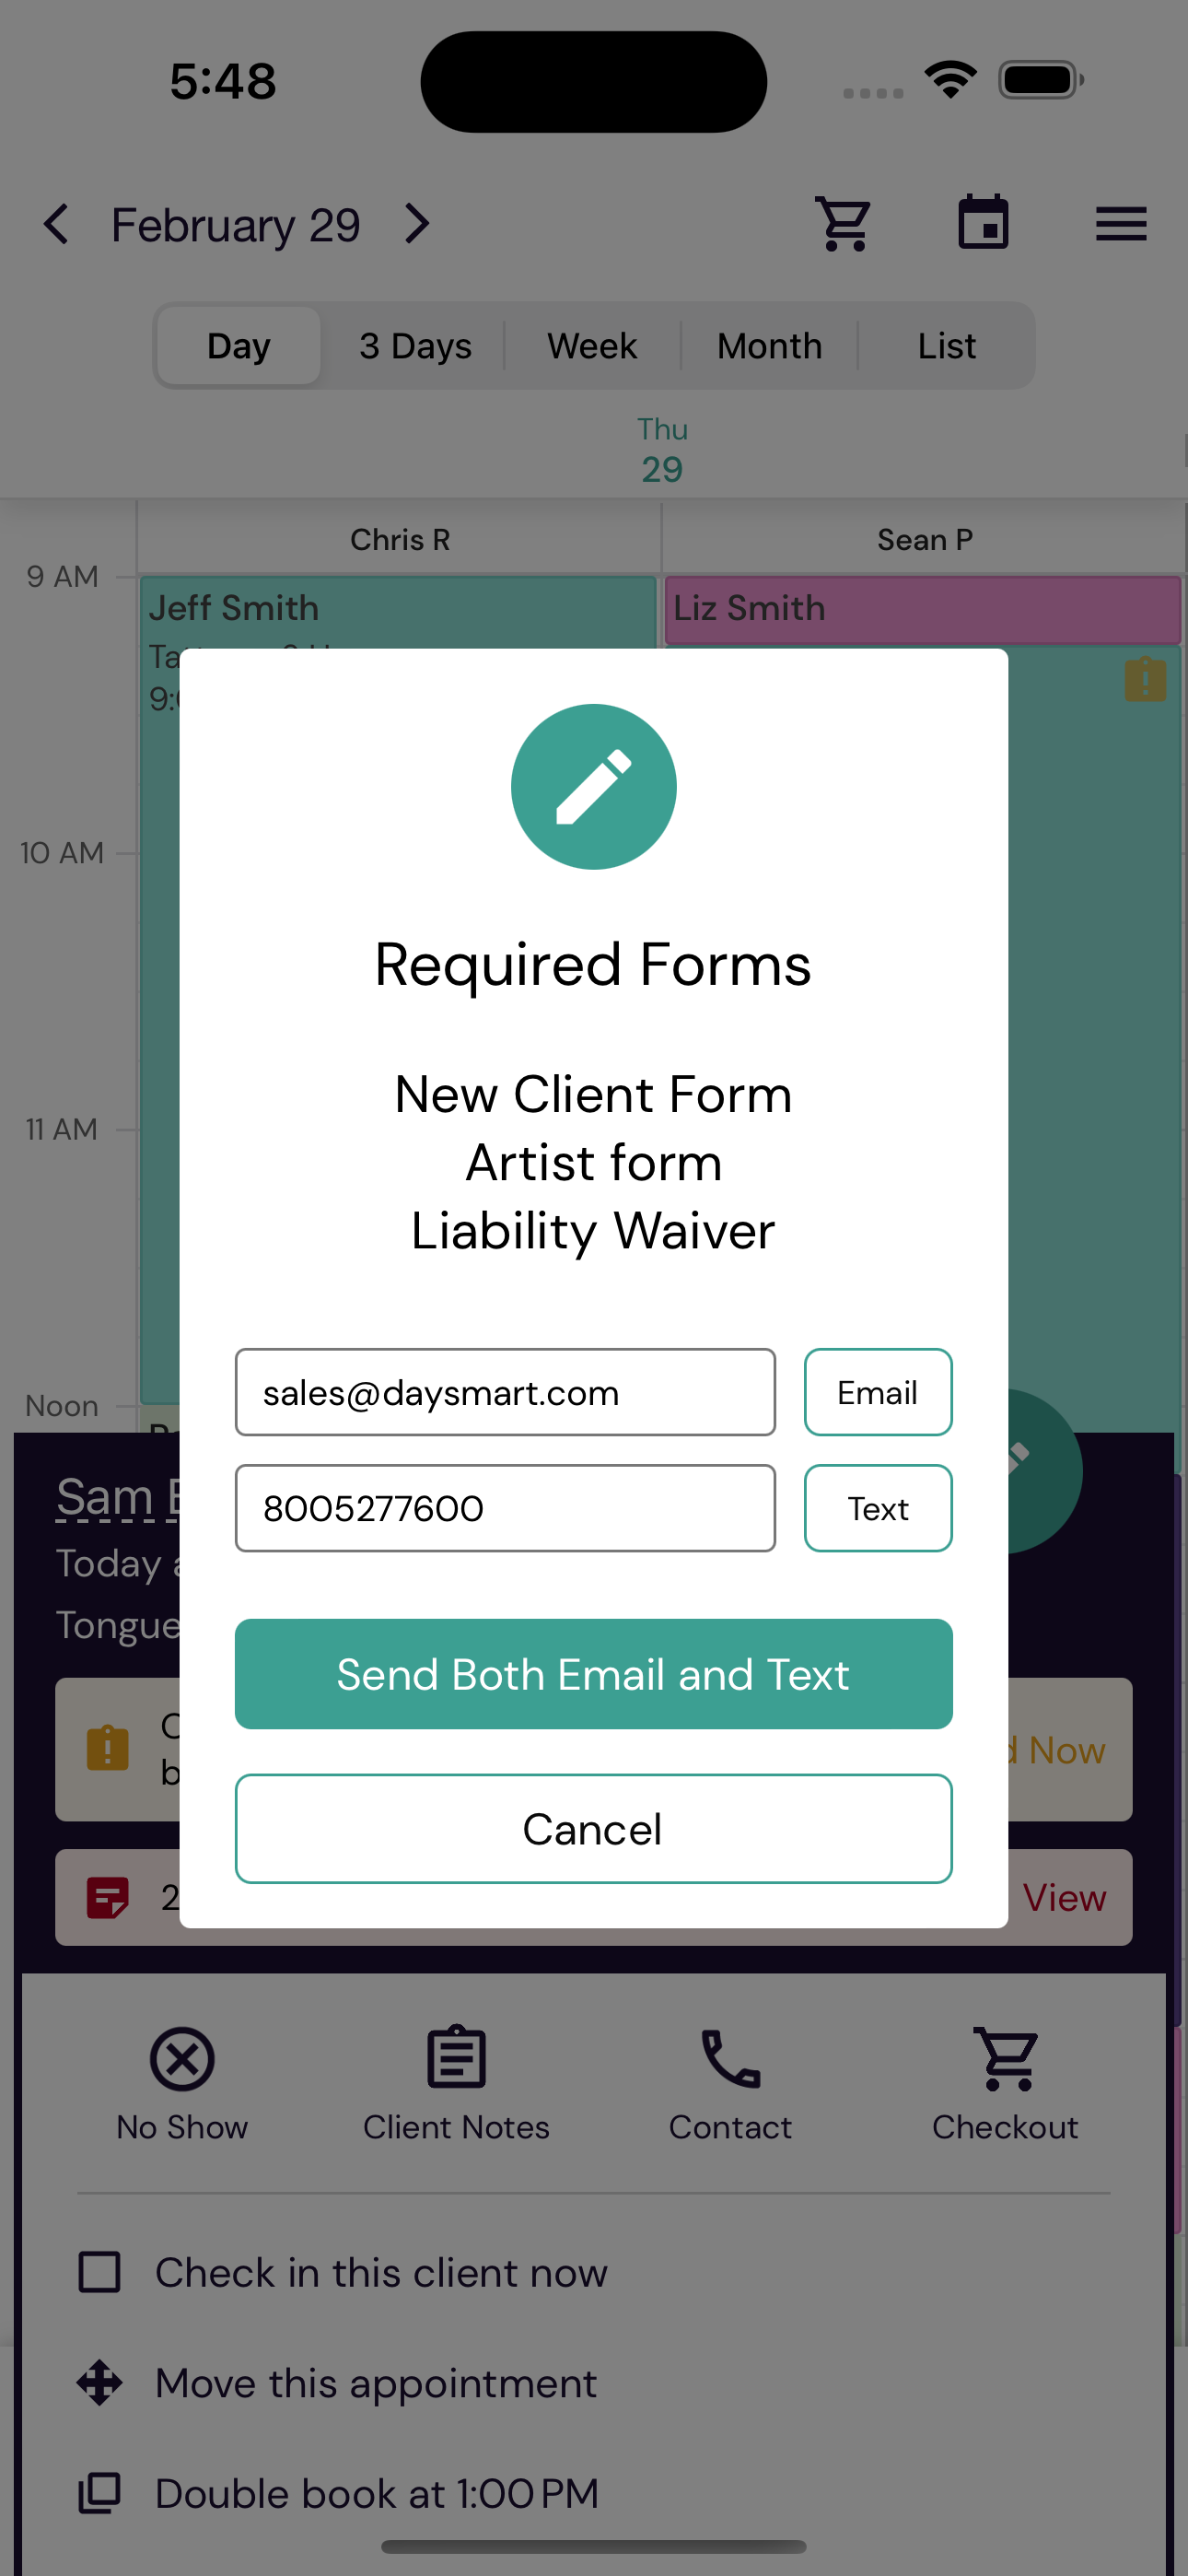 Save time with Digital Forms that are sent to customers automatically when booking specific services, prompting clients to fill in and sign documents before they arrive. 